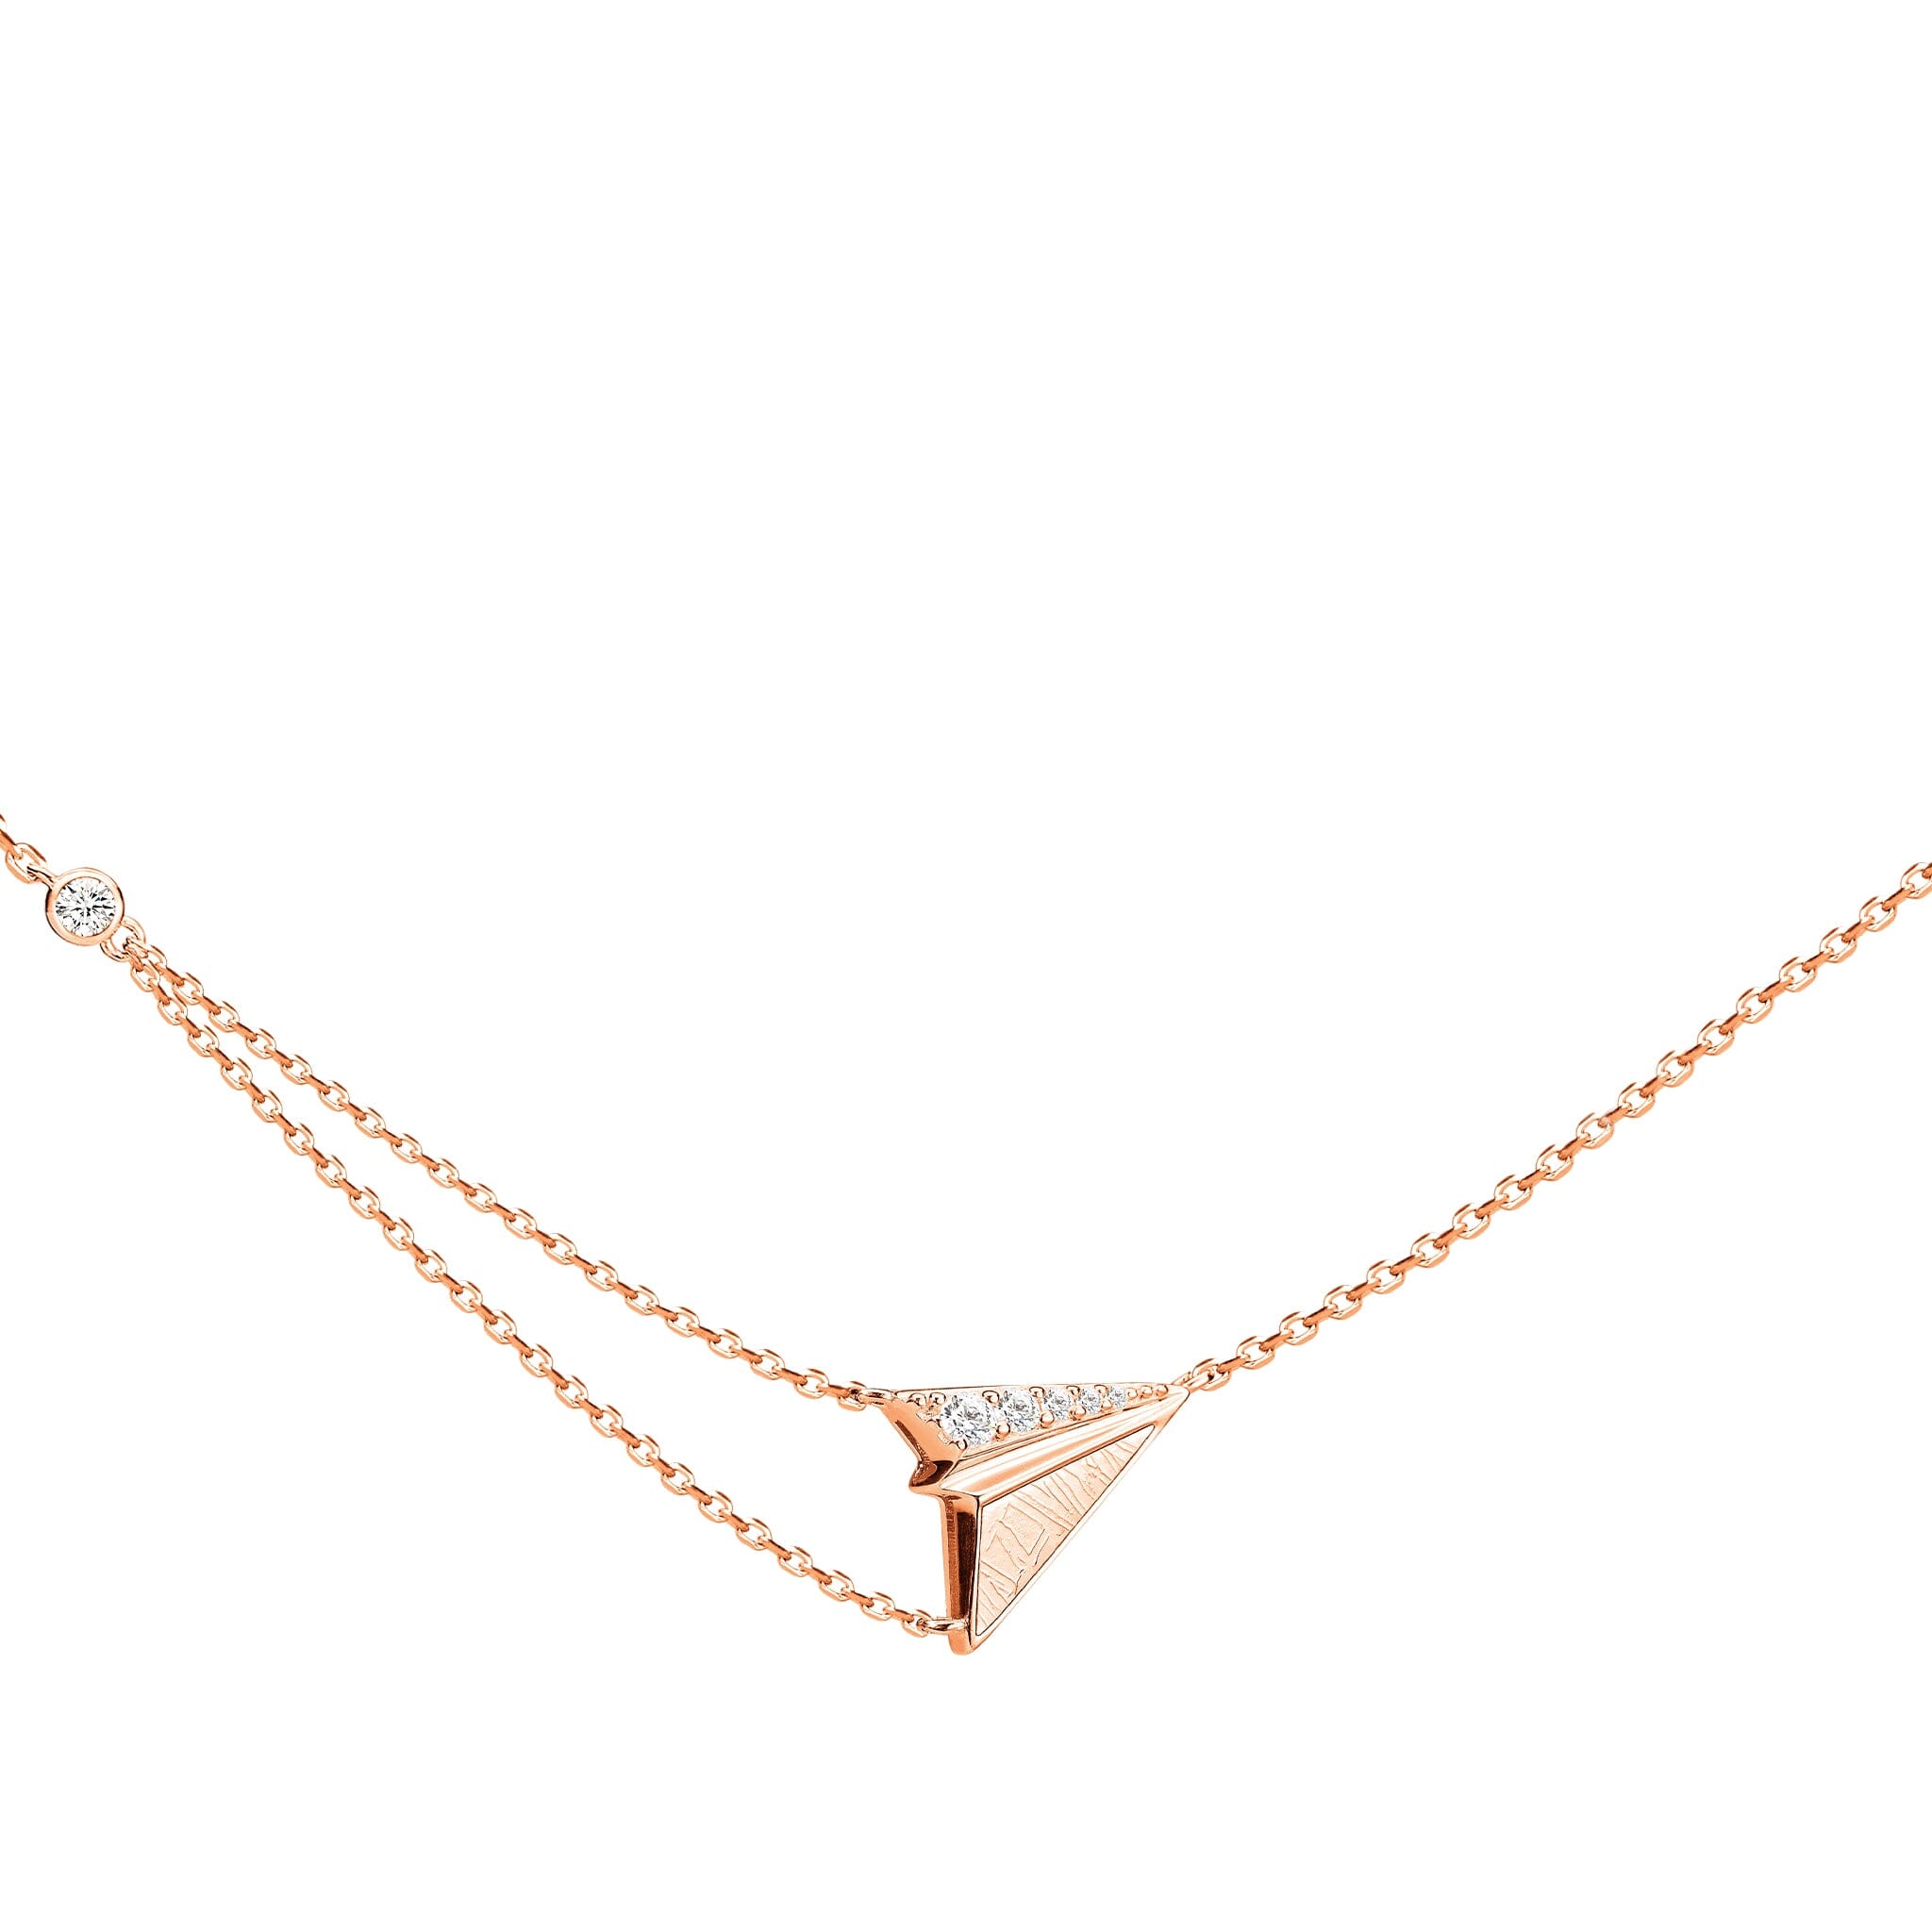 Women's Paper Airplane Necklace with Meteorite Necklaces WAA FASHION GROUP Rose Gold Adjustable 